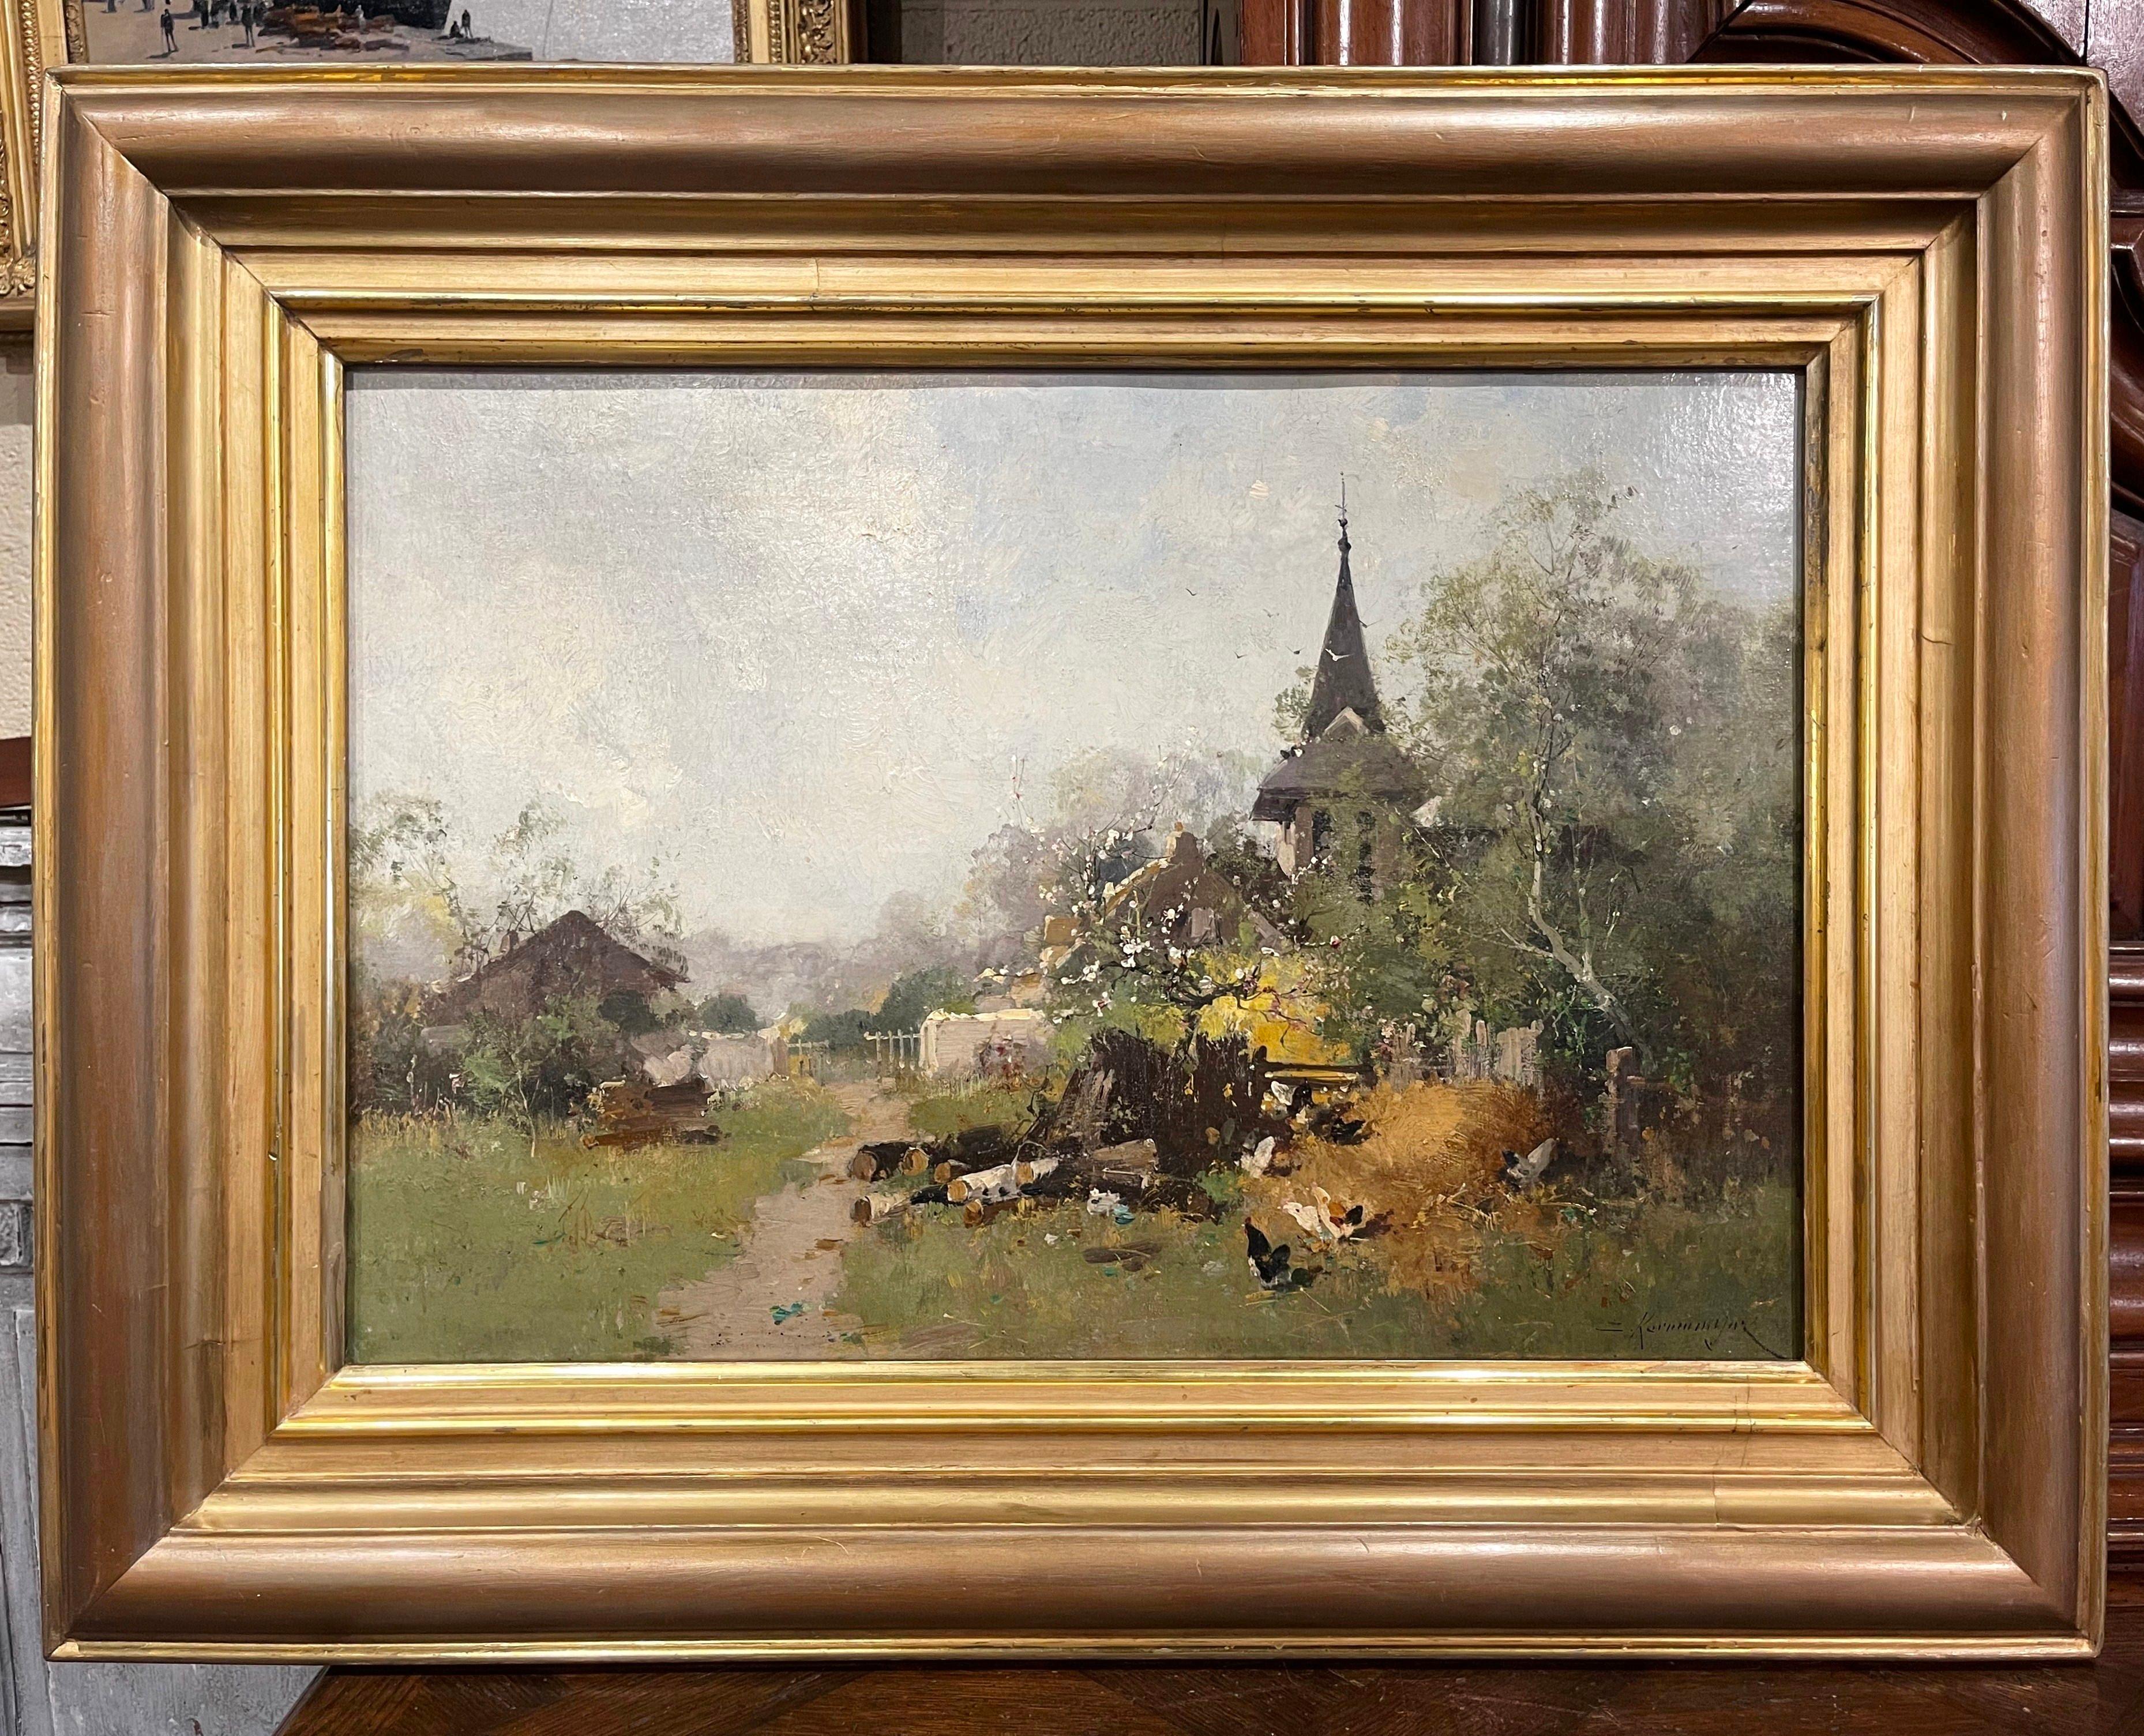 Giltwood  19th Century Framed Farmyard Oil Painting Signed Kermanguy for E. Galien-Laloue For Sale